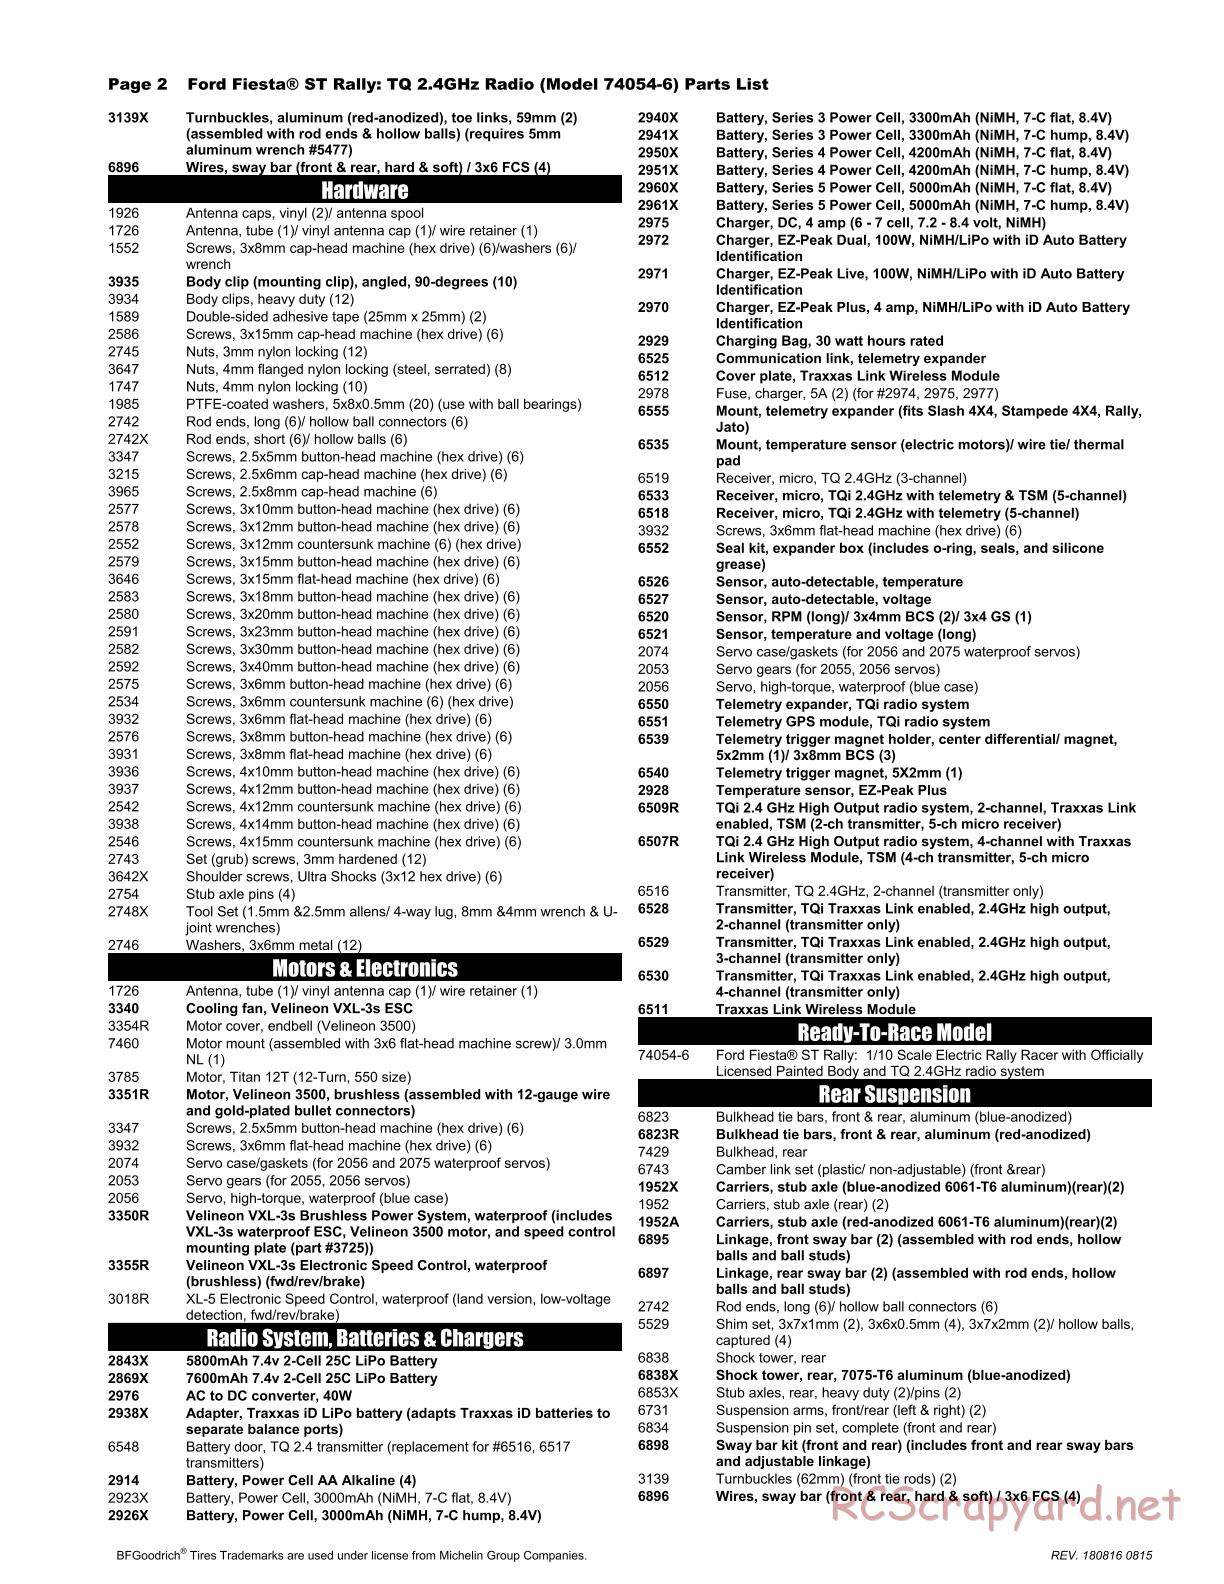 Traxxas - Ford Fiesta ST - NOS Deegan 38 Rally - Parts List - Page 2